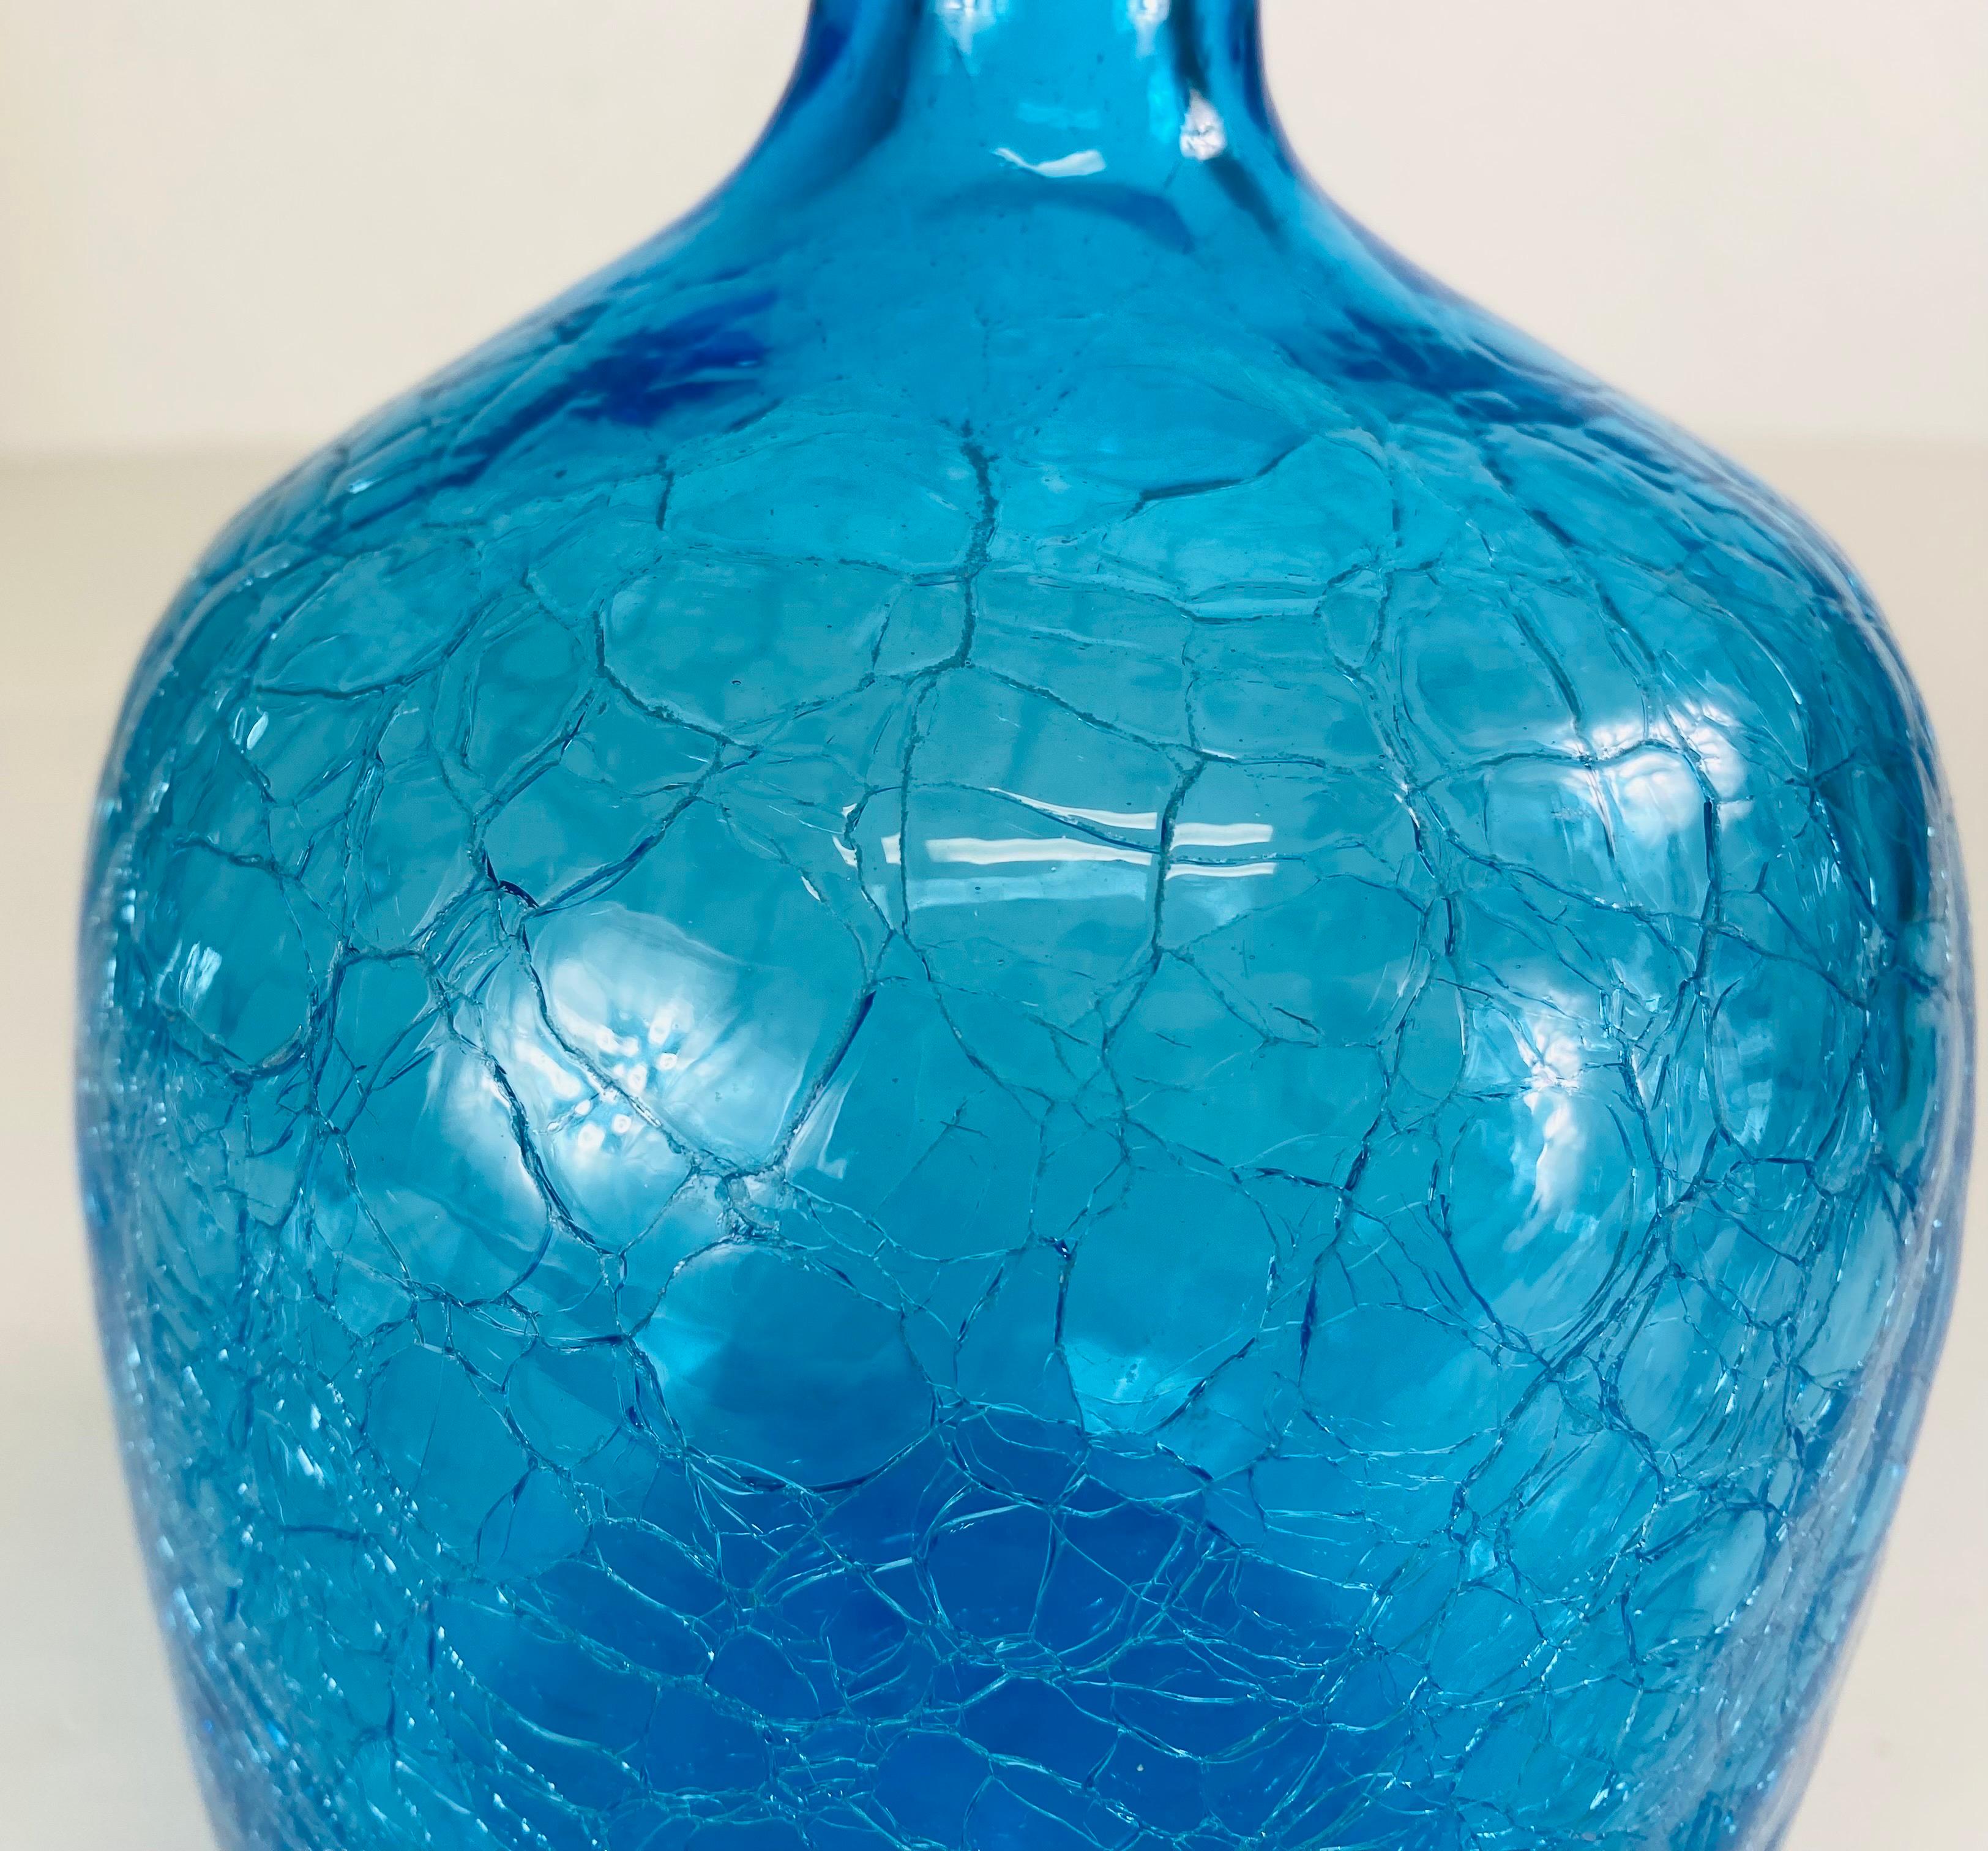 This is a large mid-century vintage Blenko blue glass jar with his original stopper. This blue jar has a heavily crackled finish of the surface and is complete with its original tall blue stopper. The Blanco jar and stopper is American made circa